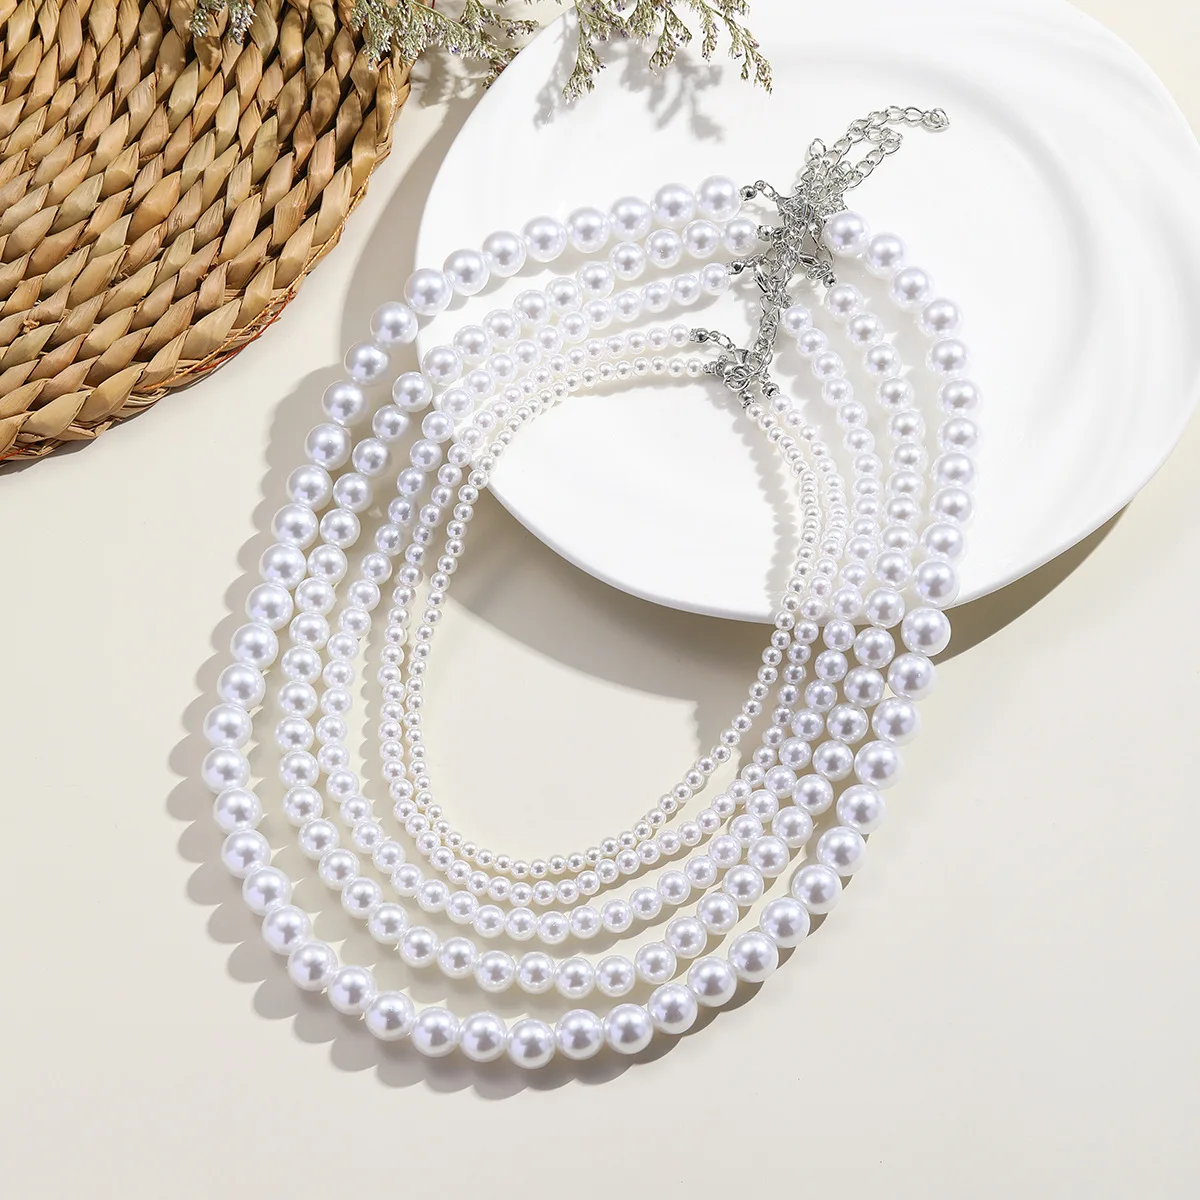 

4/6/8/10/12mm White Imitation Pearl Necklace Fashion Beaded Collar Chain Choker Necklace for Women Trendy Wedding Jewelry